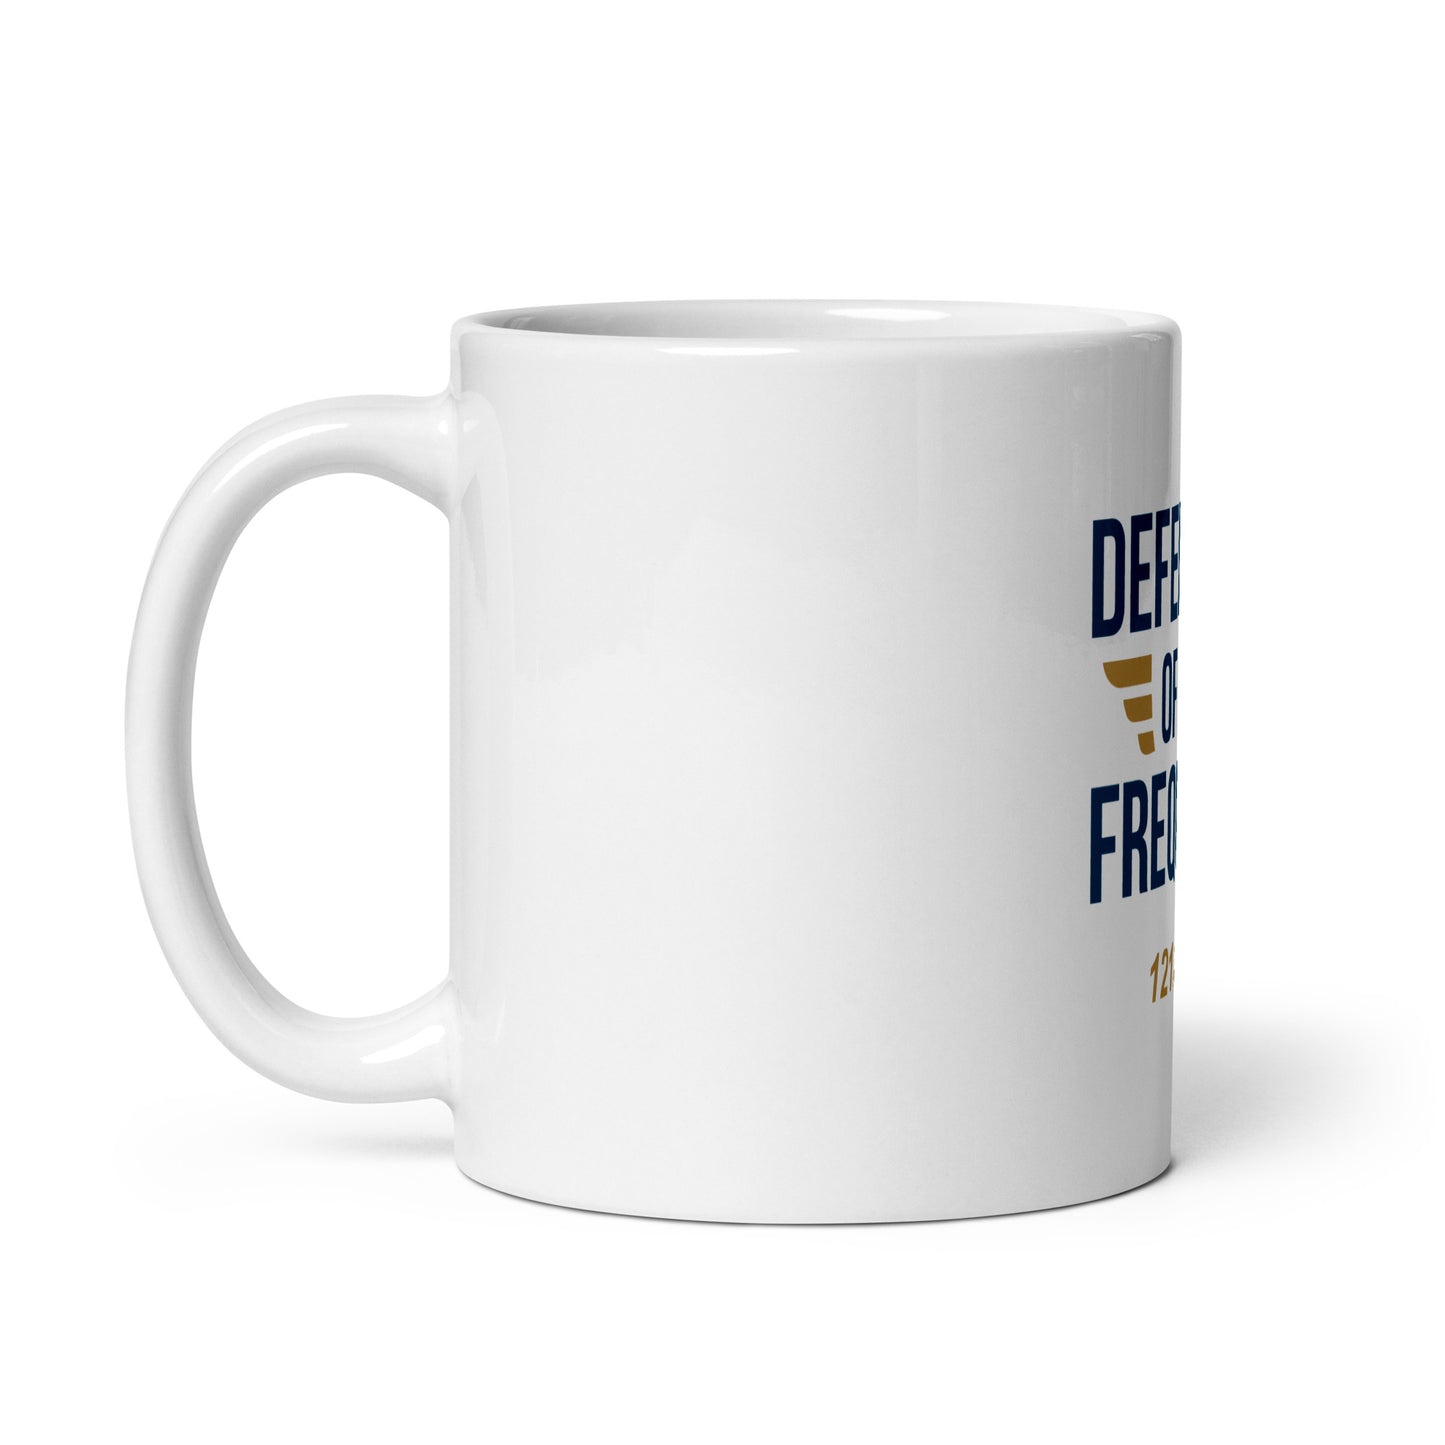 Defenders of the Frequency | White Mug